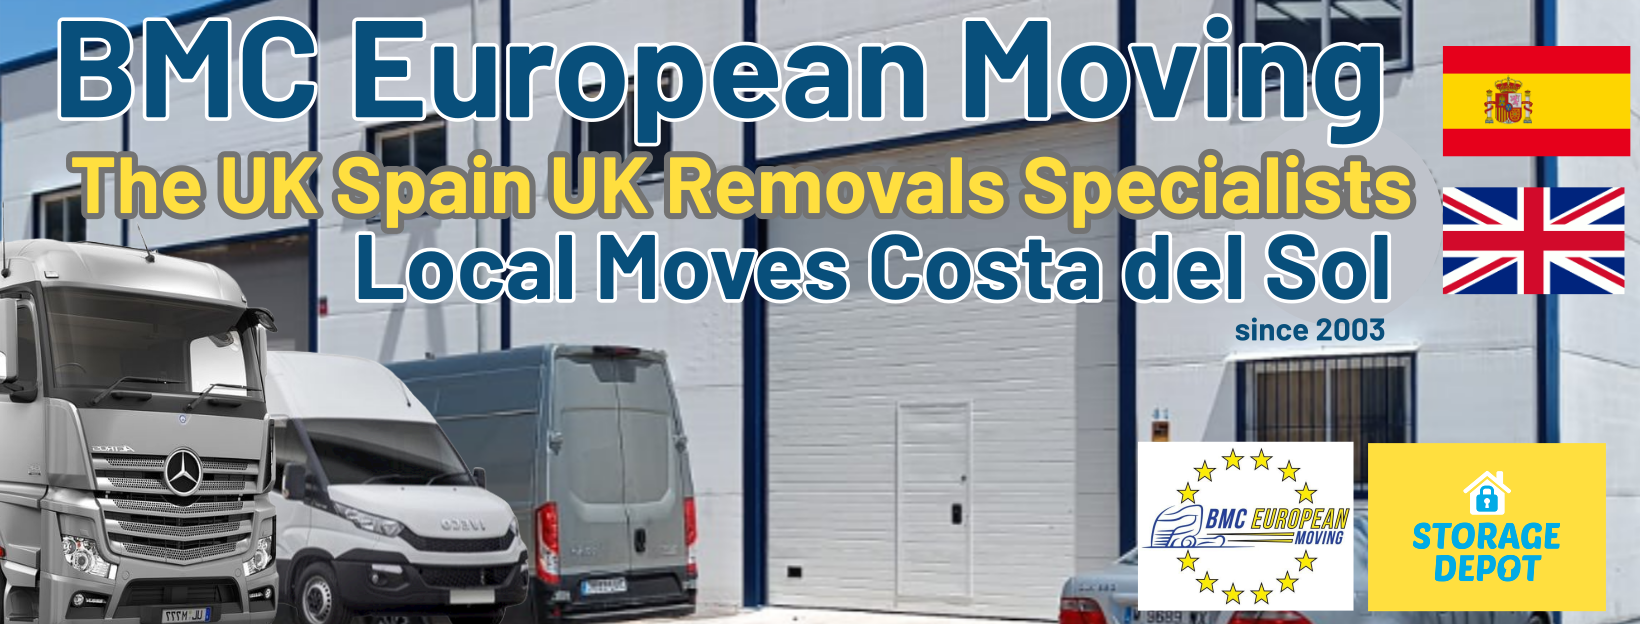 House removals from Spain to the UK or vice versa. Professional service at a competitive cost